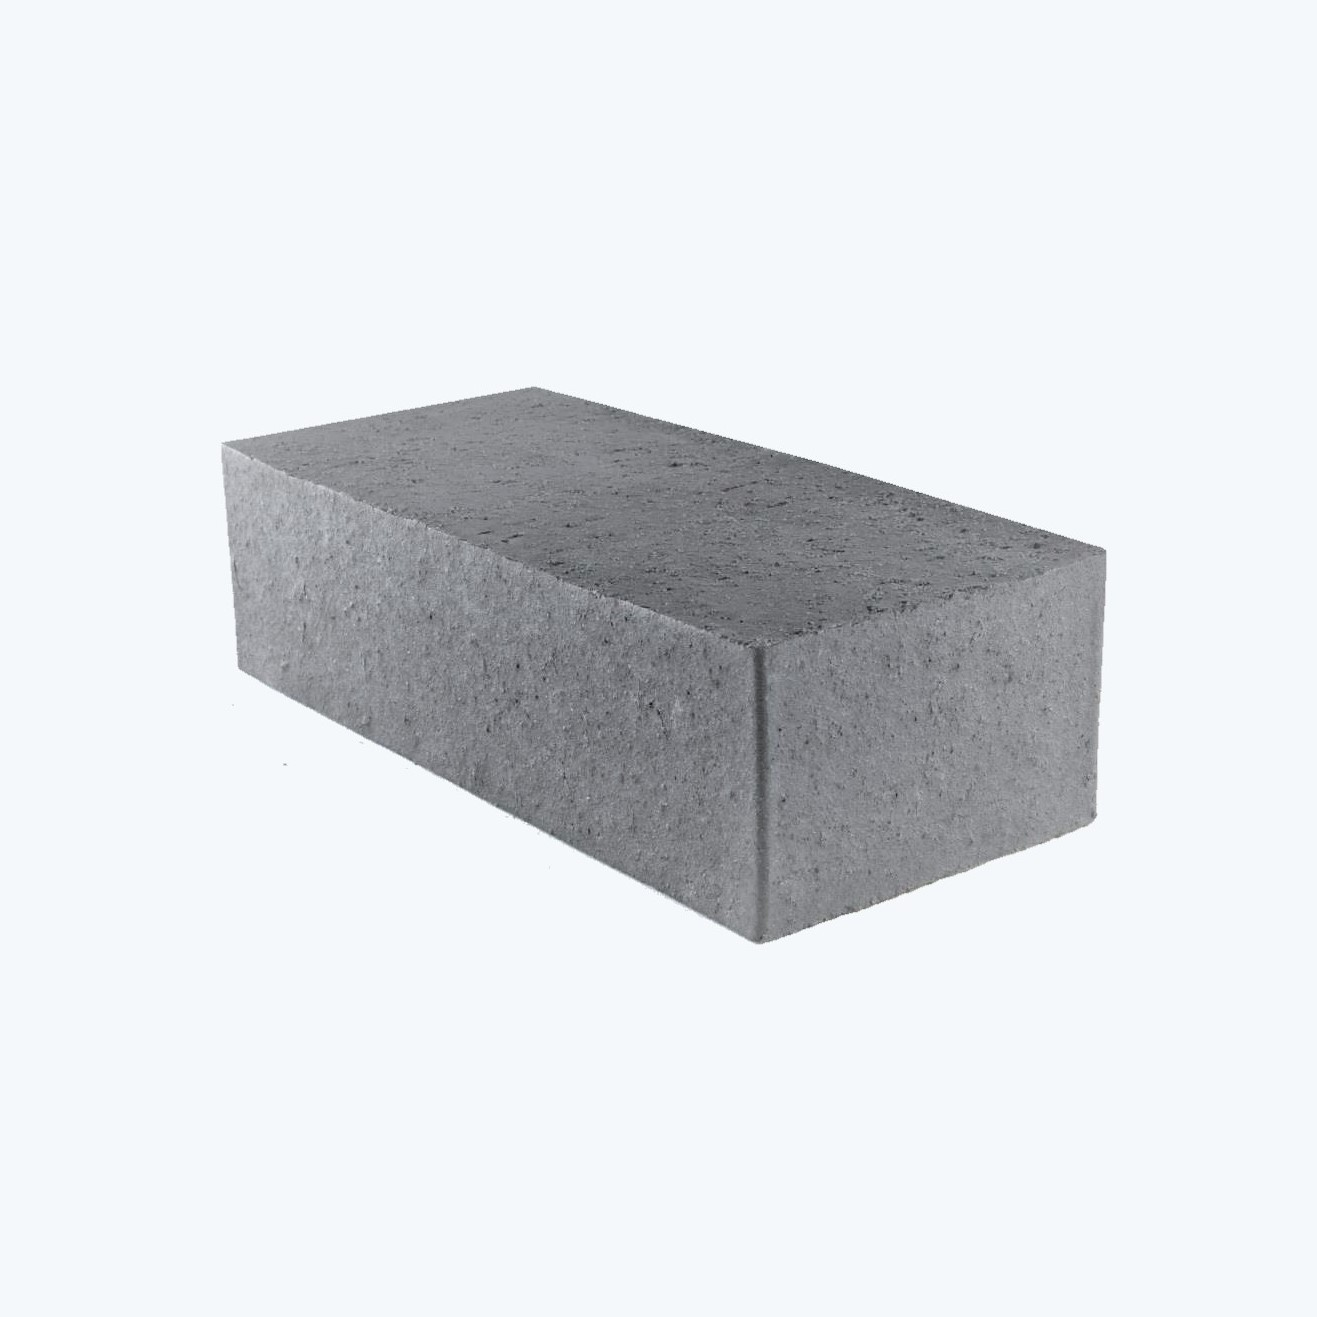 Wienerberger K20165s Staffordshire Smooth Blue SOLID Class B Engineering Brick